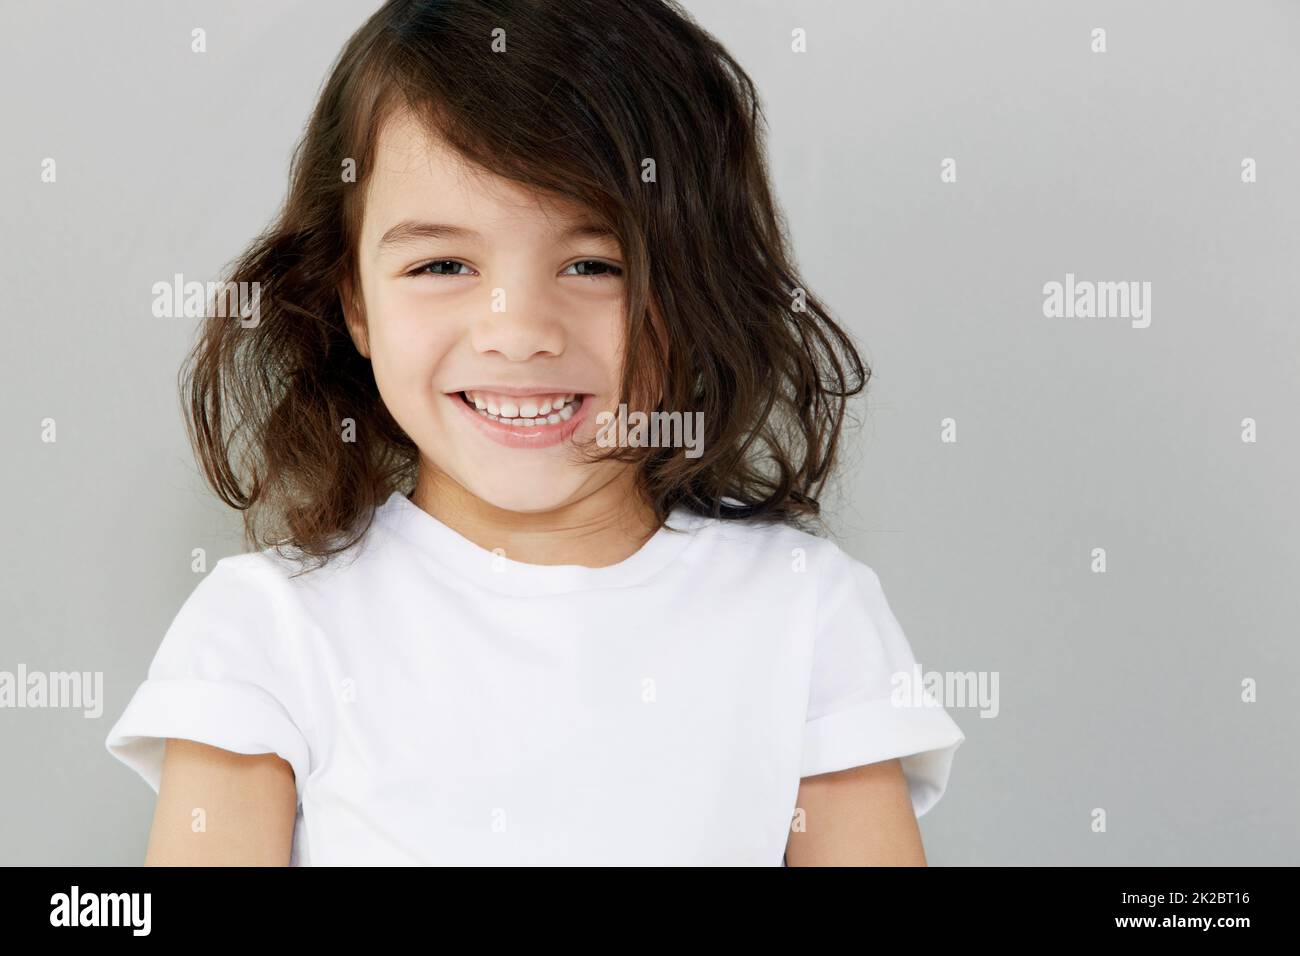 Sweet smiling. Portrait of a smiling little boy against a grey background. Stock Photo